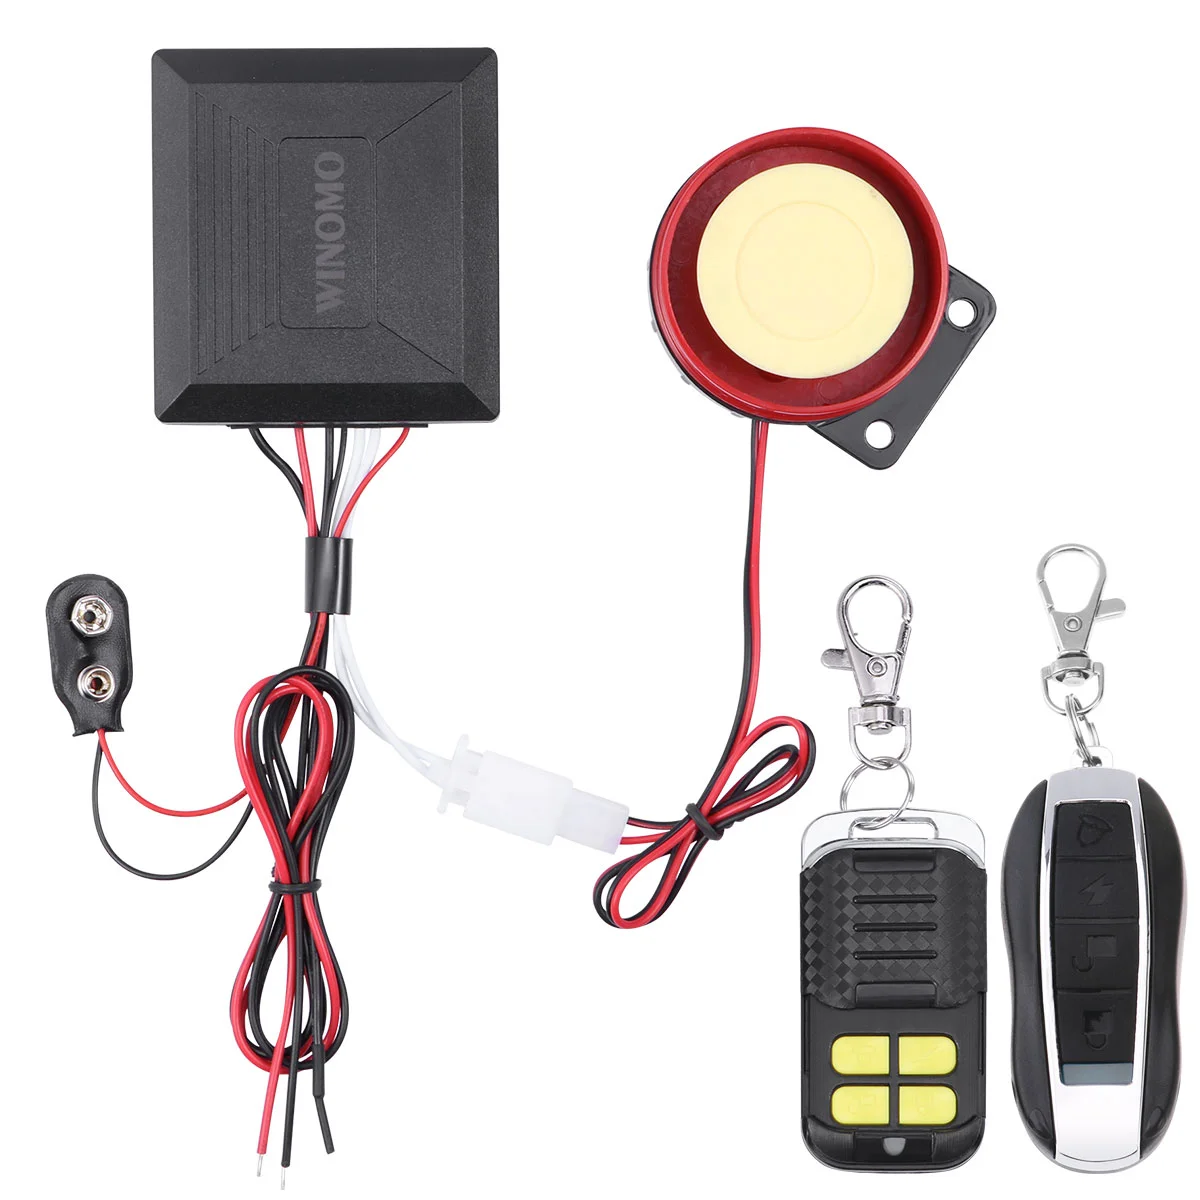 Motorbike Alarm System, 12v Double Motorcycle Universal Motorbike Scooter Anti Alarm System global universal lcd smart key remote ignition engine start stop keyless entry control auto central lock smart car alarm system